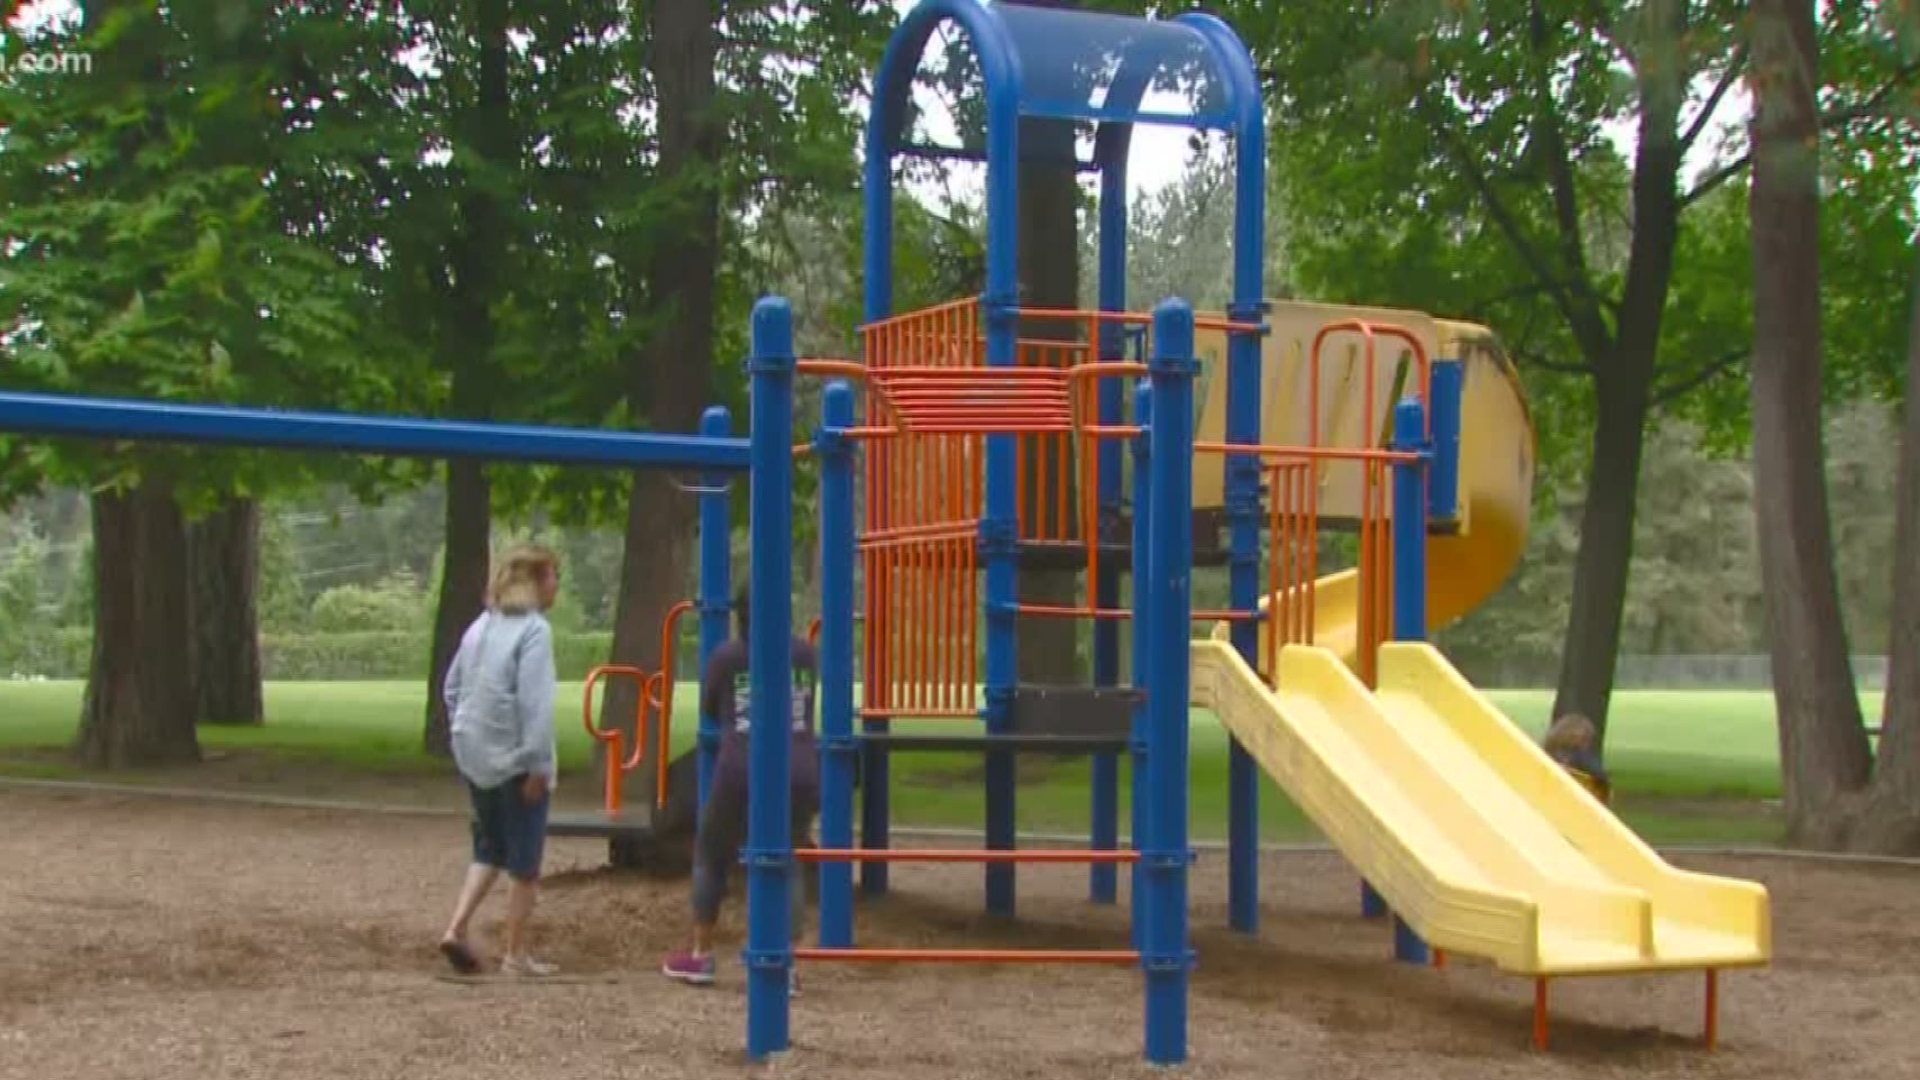 Spokane County has reopened playgrounds and allowed for elective surgeries to restart. Also, all Spokane Veterans Home residents are ready to move back.